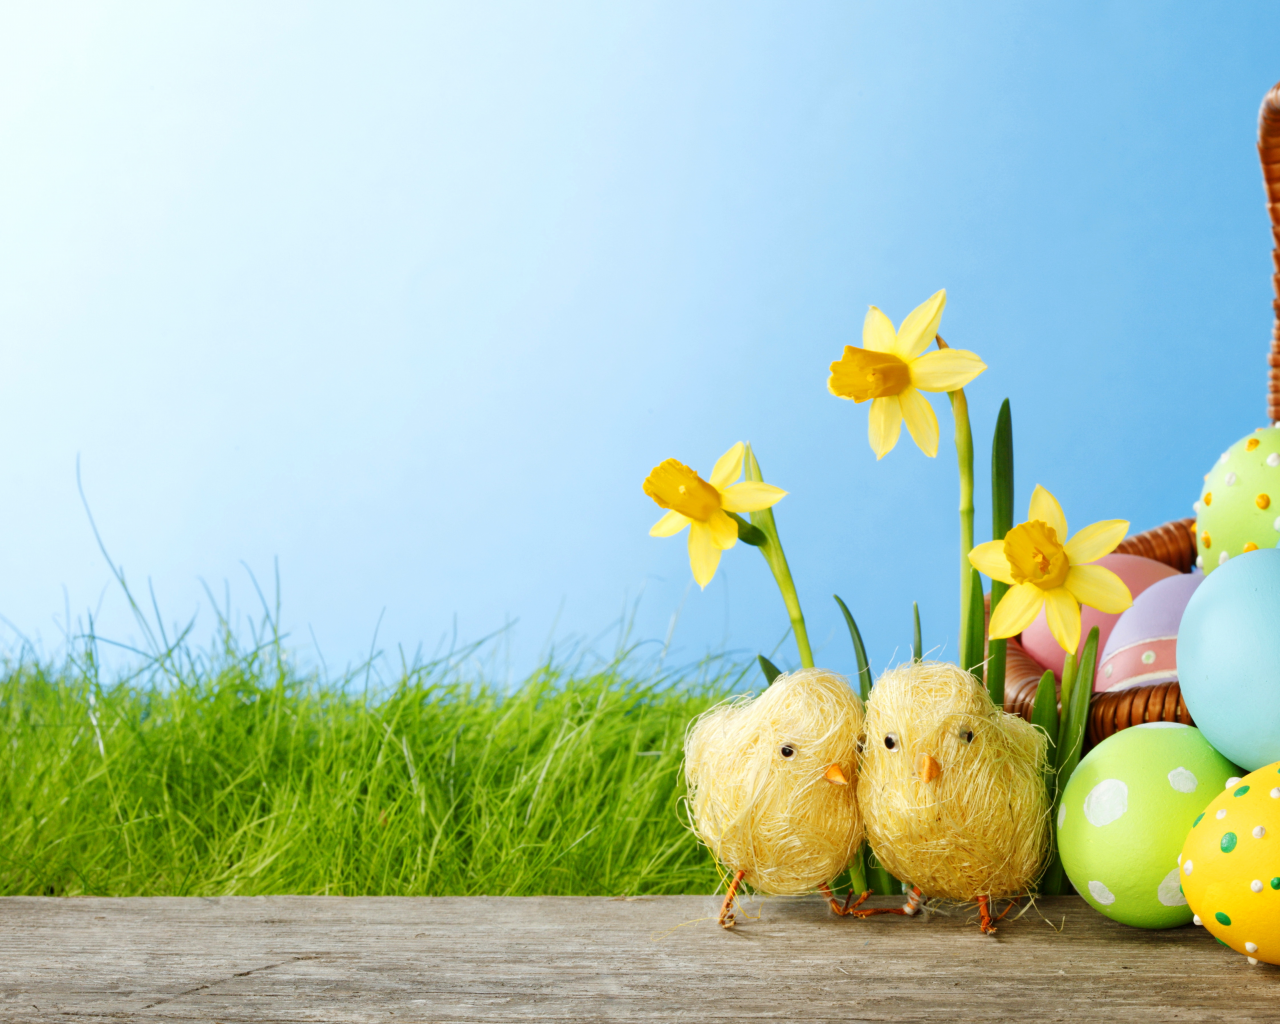 easter, eggs, spring, flowers, пасха, grass, springer, colorful, daffodils, весна